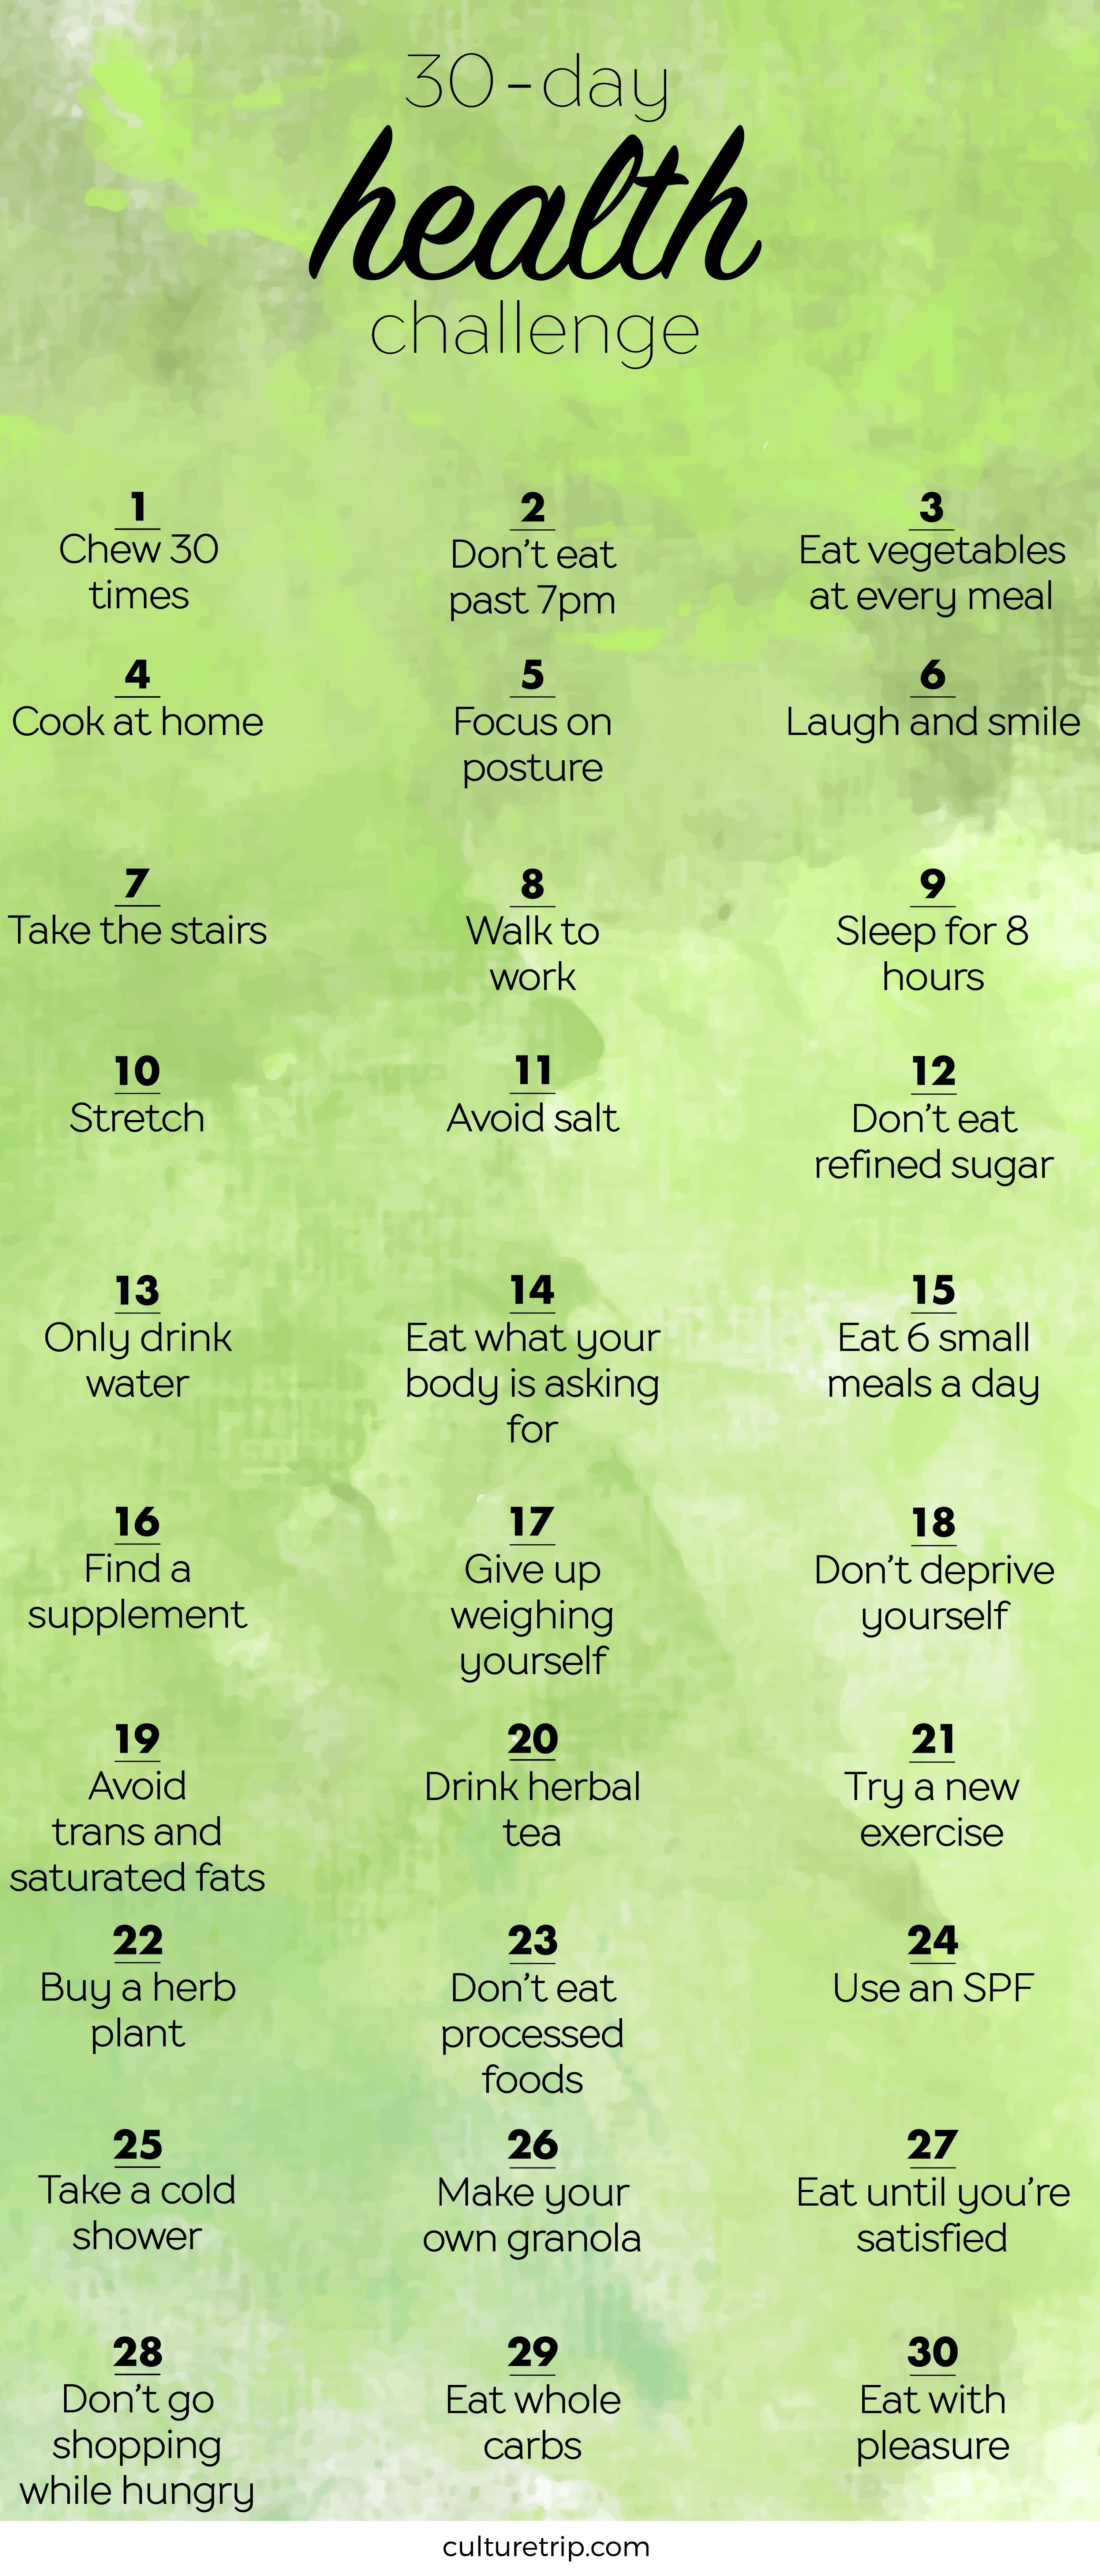 The 30-Day Health Challenge